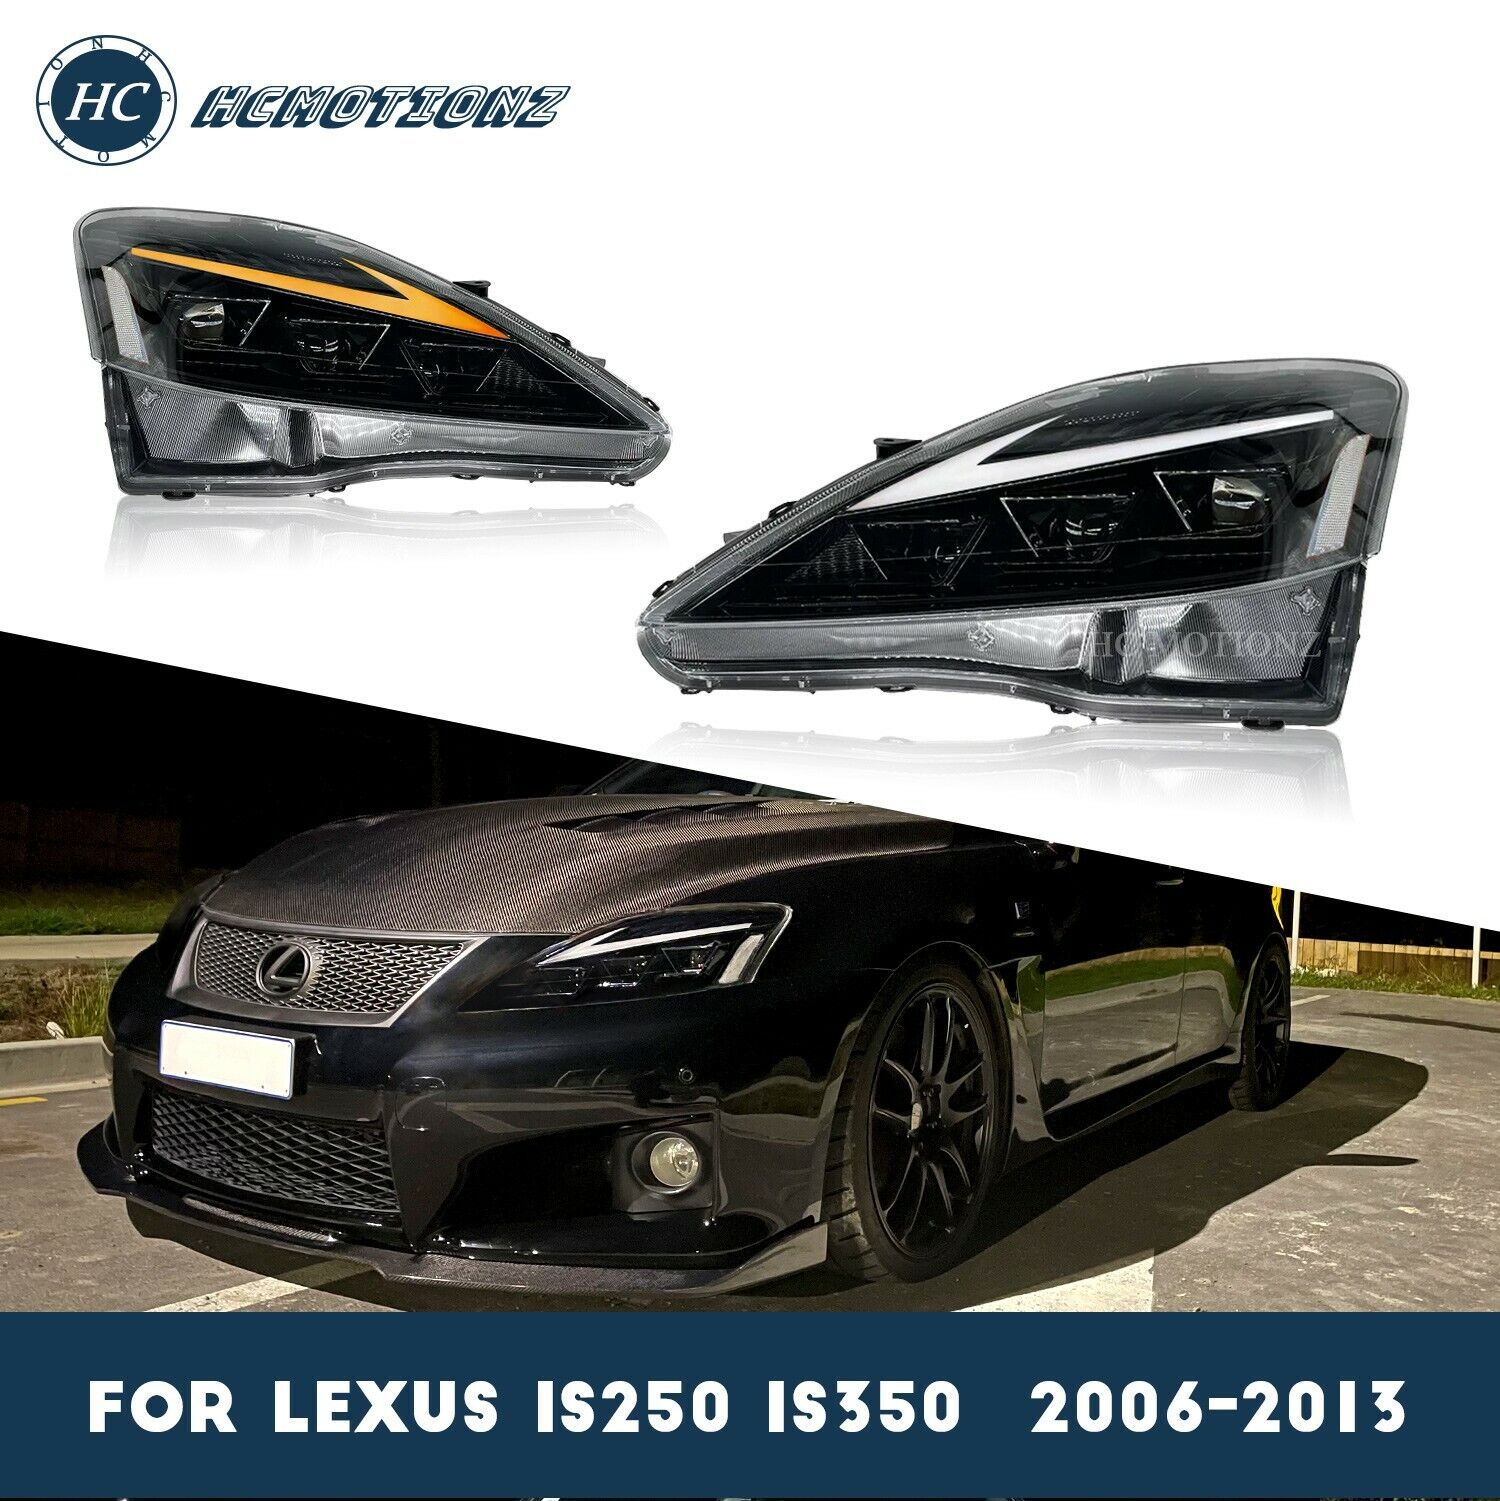 HC Motion Clear LED Headlights For Lexus IS250 350 C ISF 2006-2013 DRL Animation